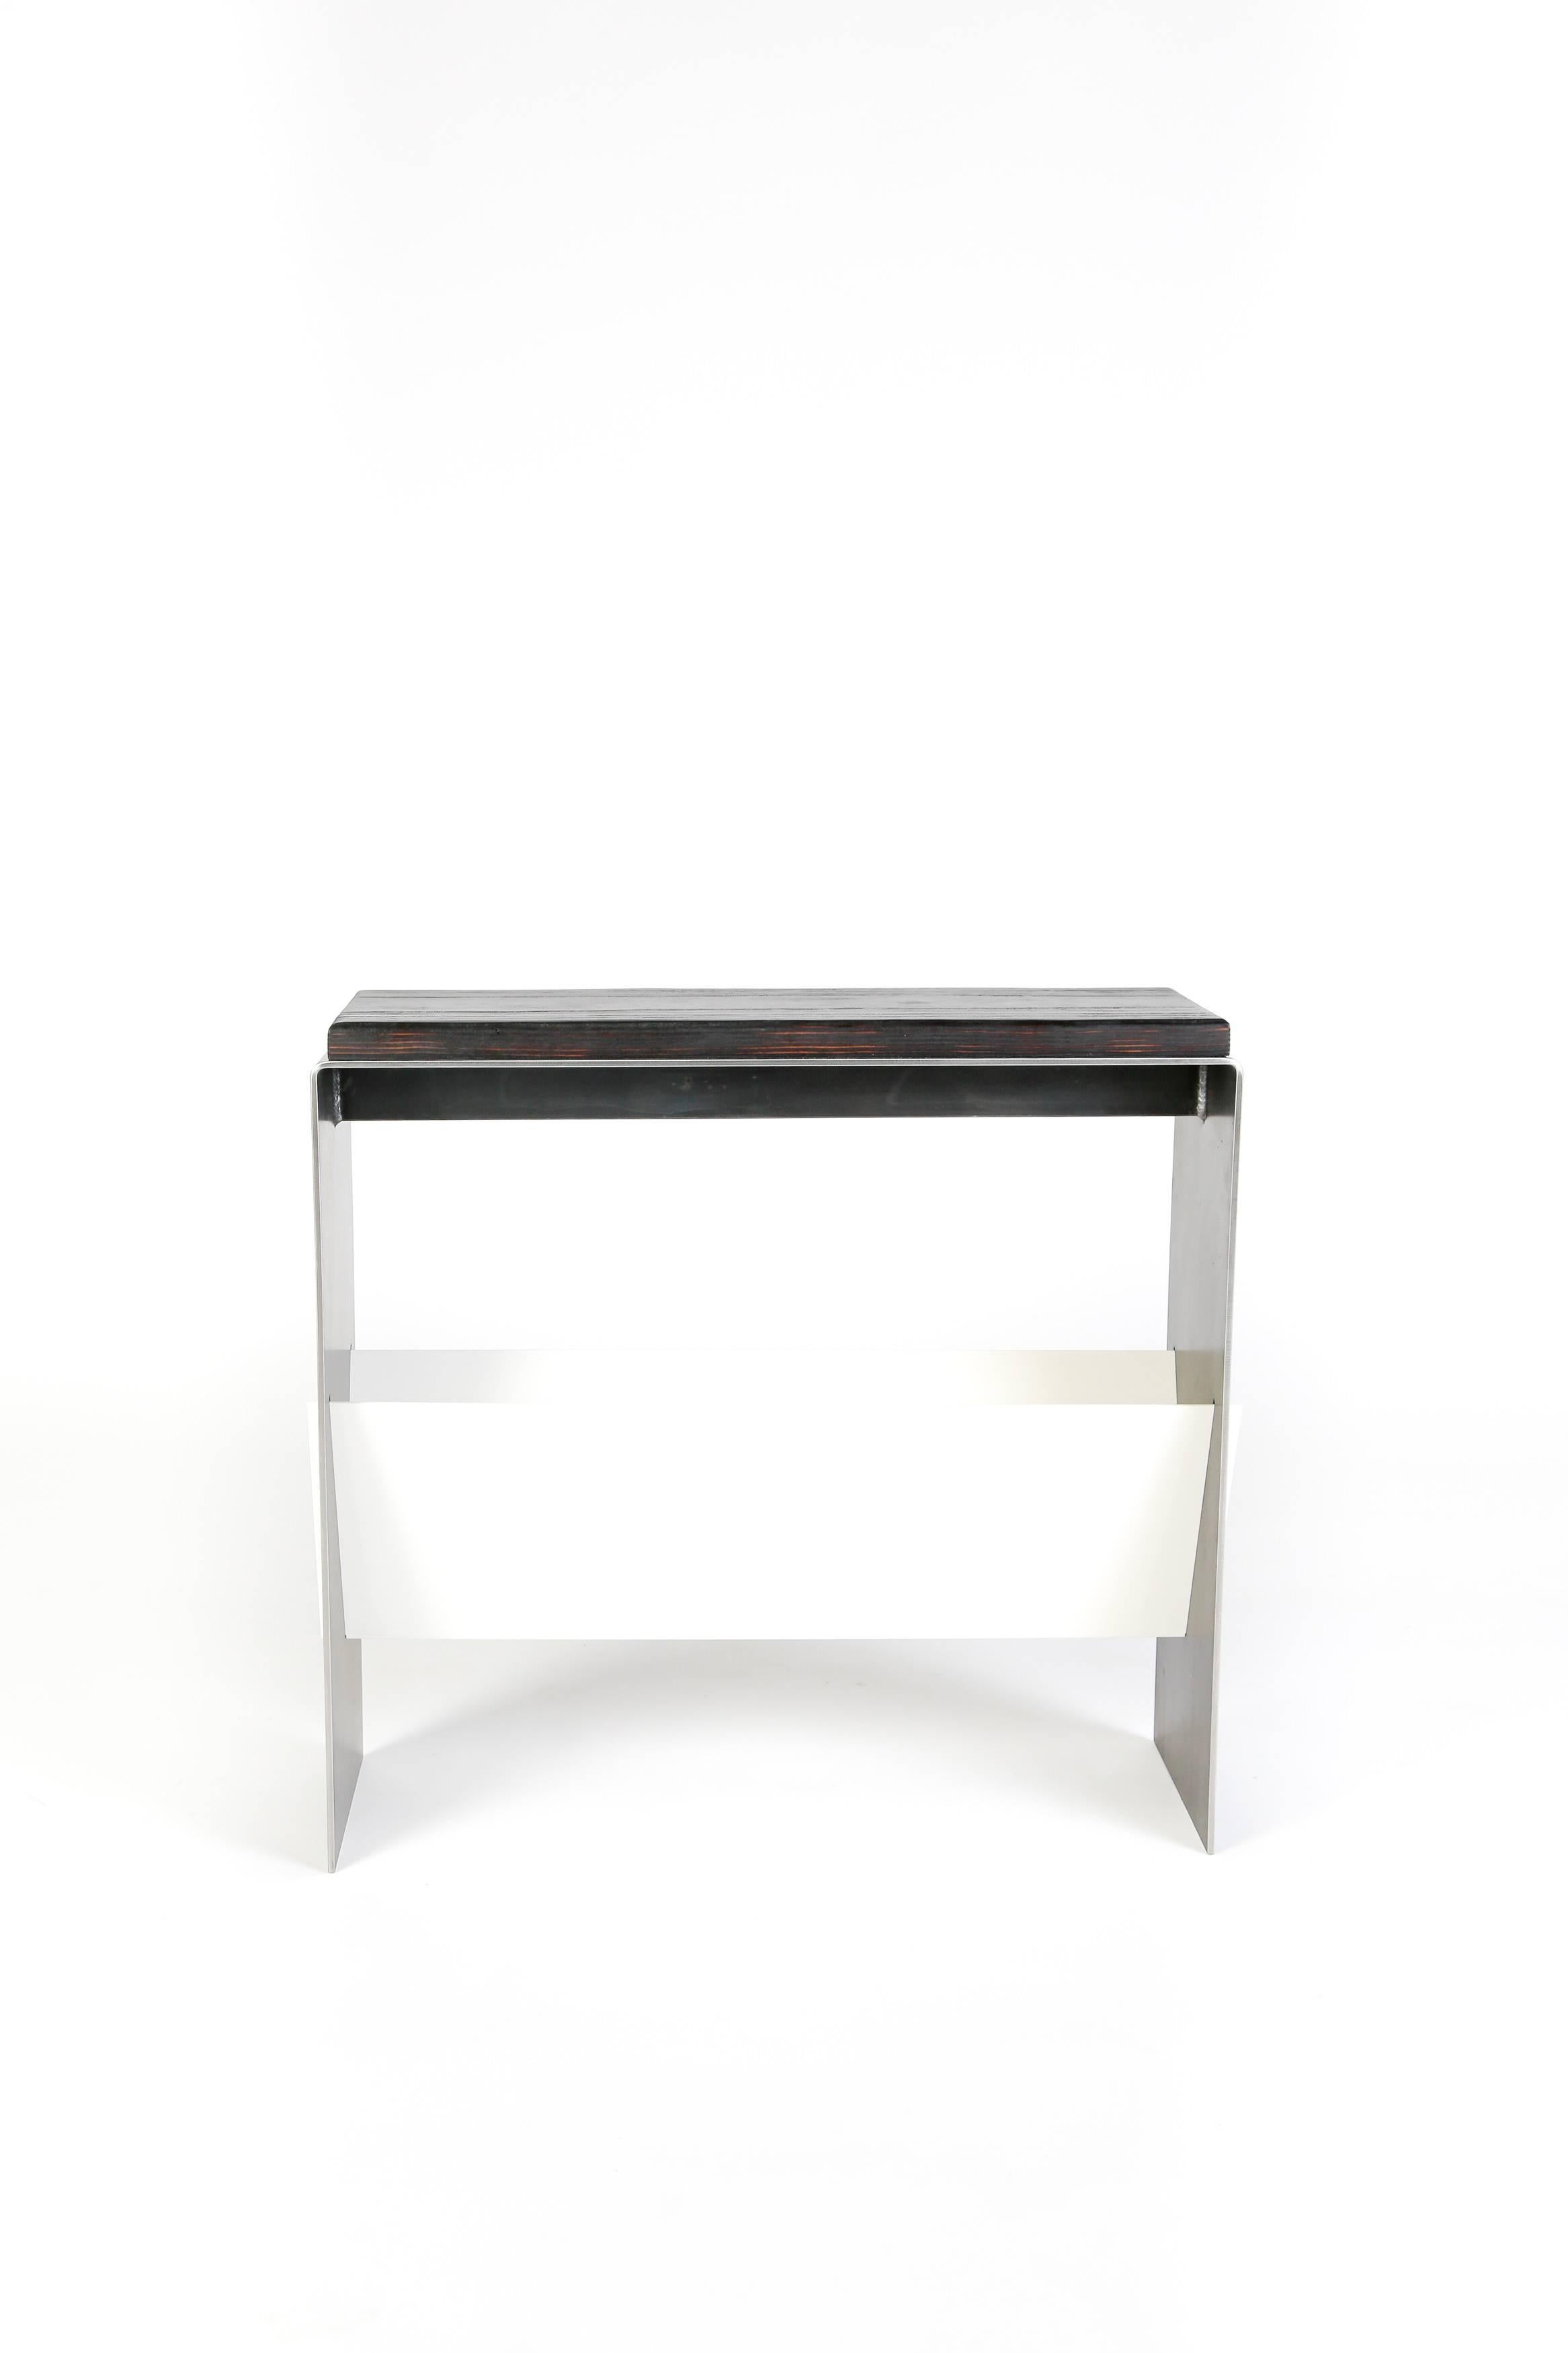 Modern The V Table, a Combination of Reclaimed Fir and Powder Coated and Raw Steel For Sale